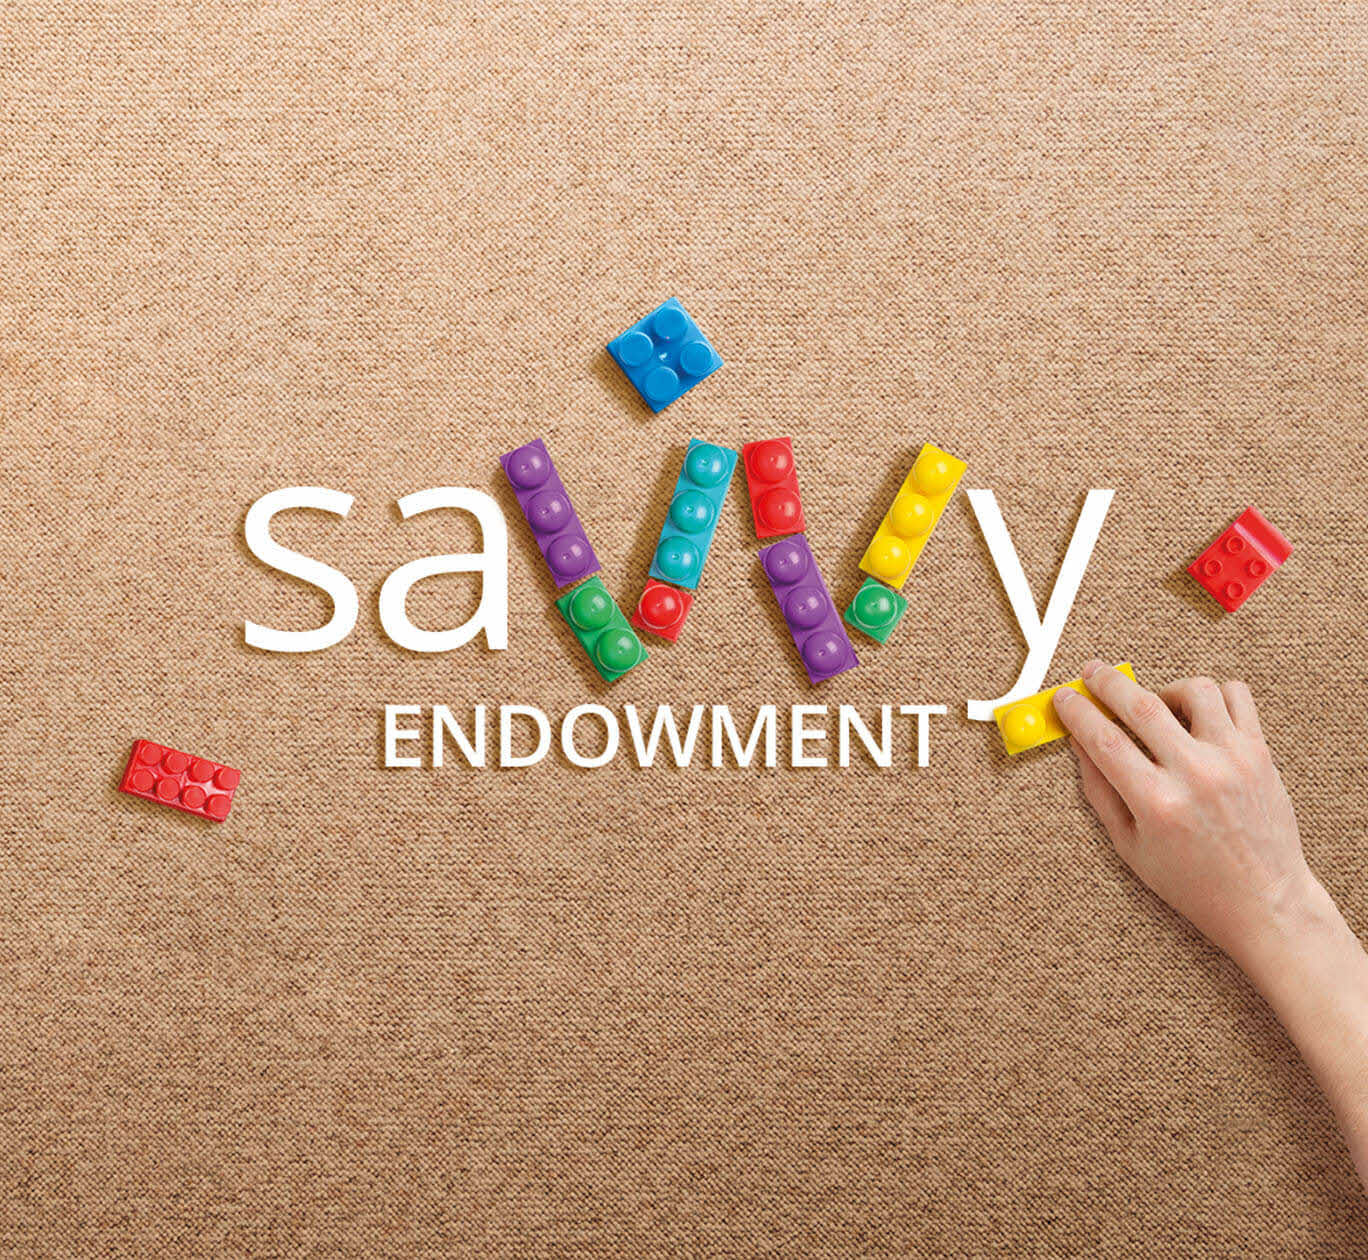 Buy SavvyEndowment 10 with SRS and get up to S$100 cash